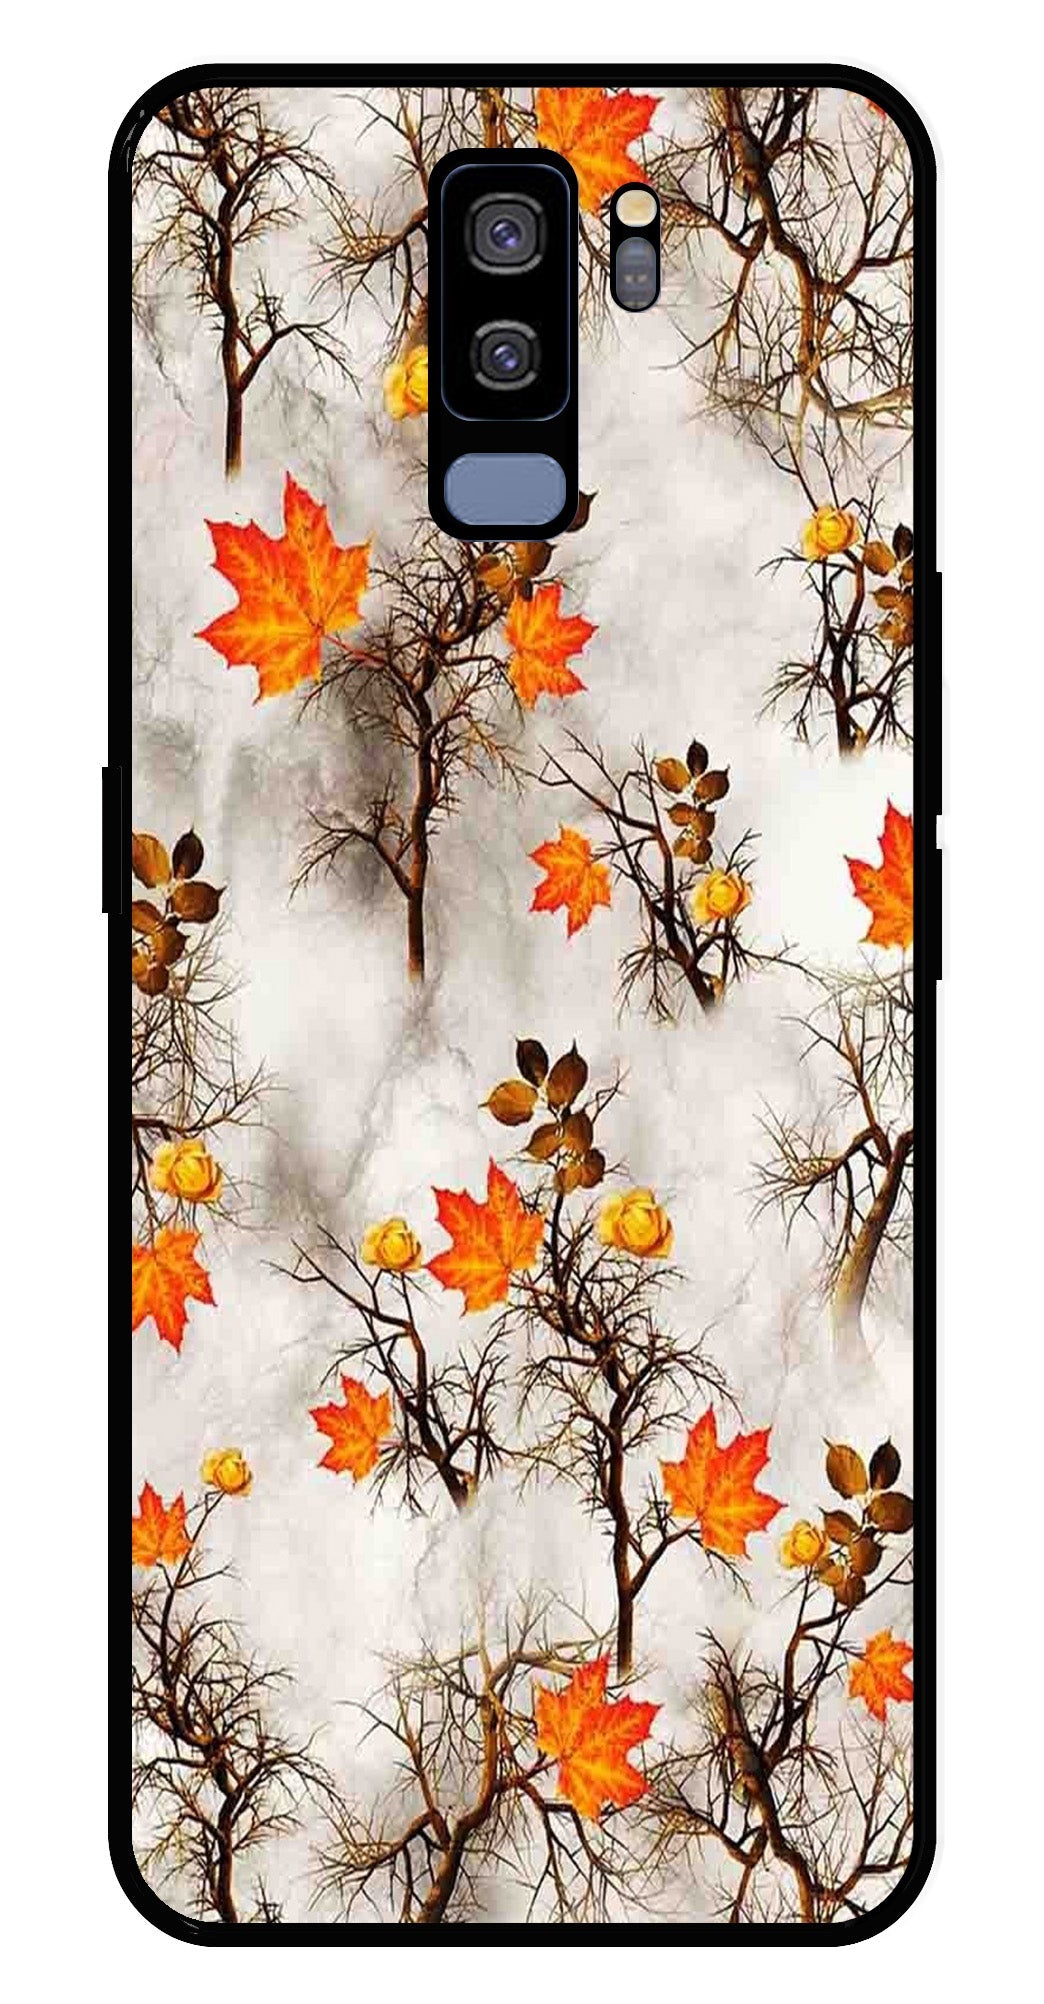 Autumn leaves Metal Mobile Case for Samsung Galaxy S9 Plus   (Design No -55)